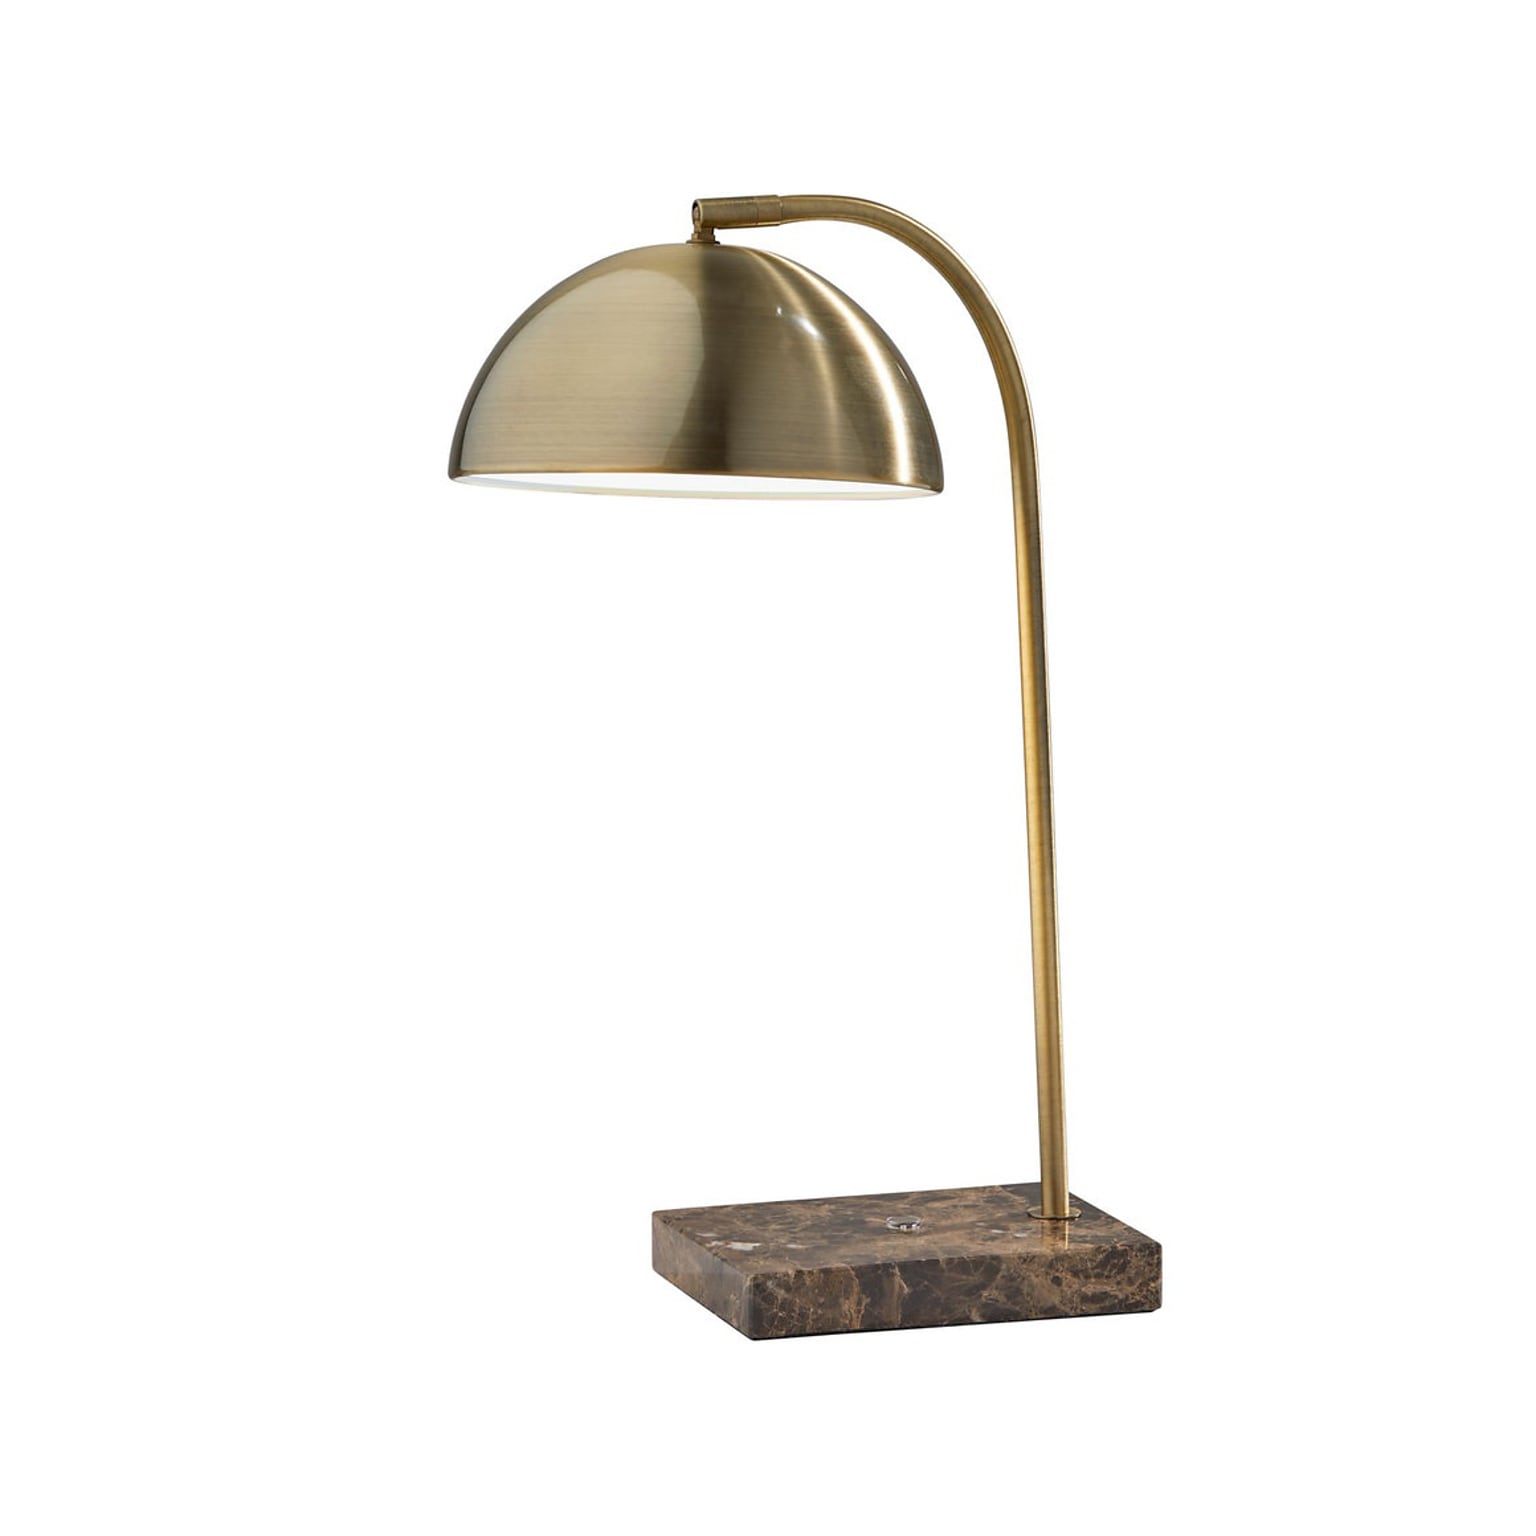 Adesso Paxton Incandescent Desk Lamp, 18, Antique Brass/Brown Marble (3478-21)